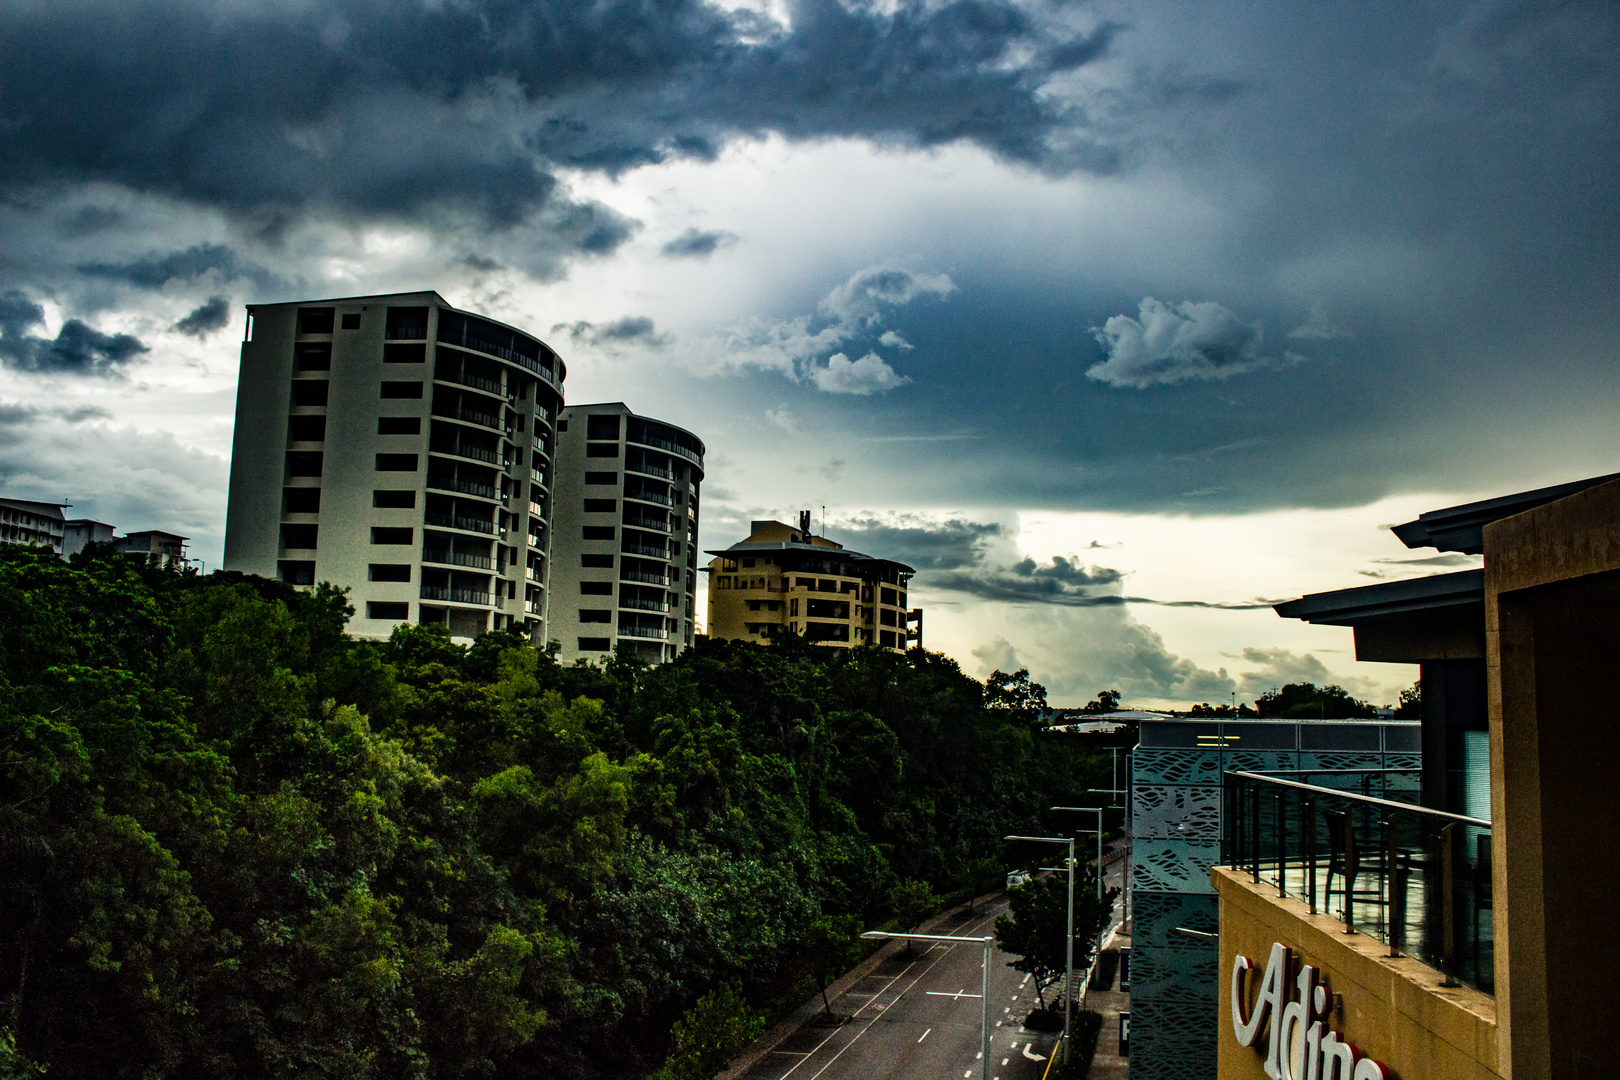 Kitchener Drive, Darwin after a storm